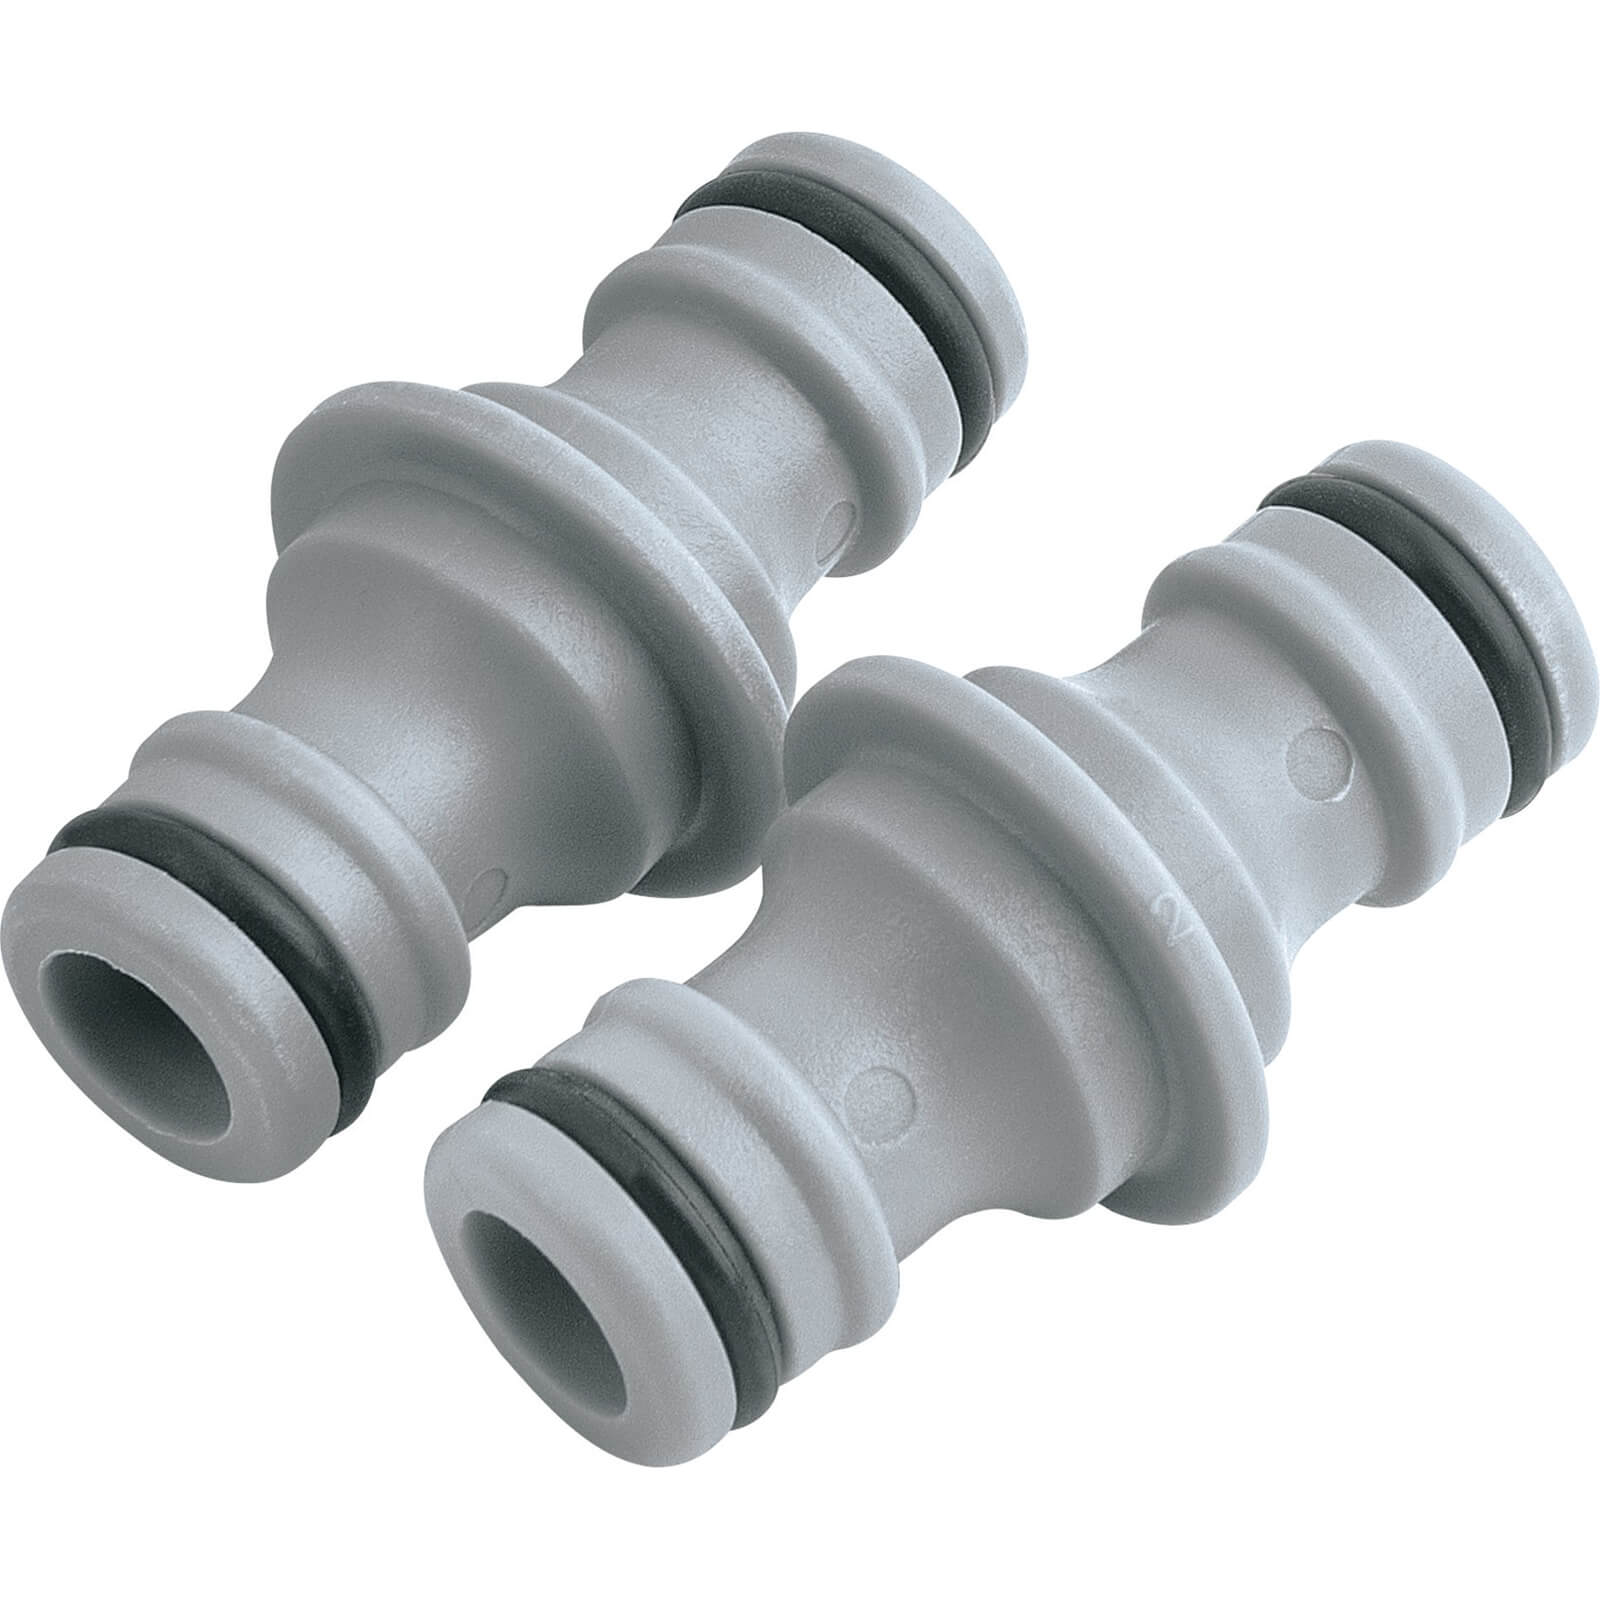 Image of Draper 2 Piece Two Way Hose Connector Set